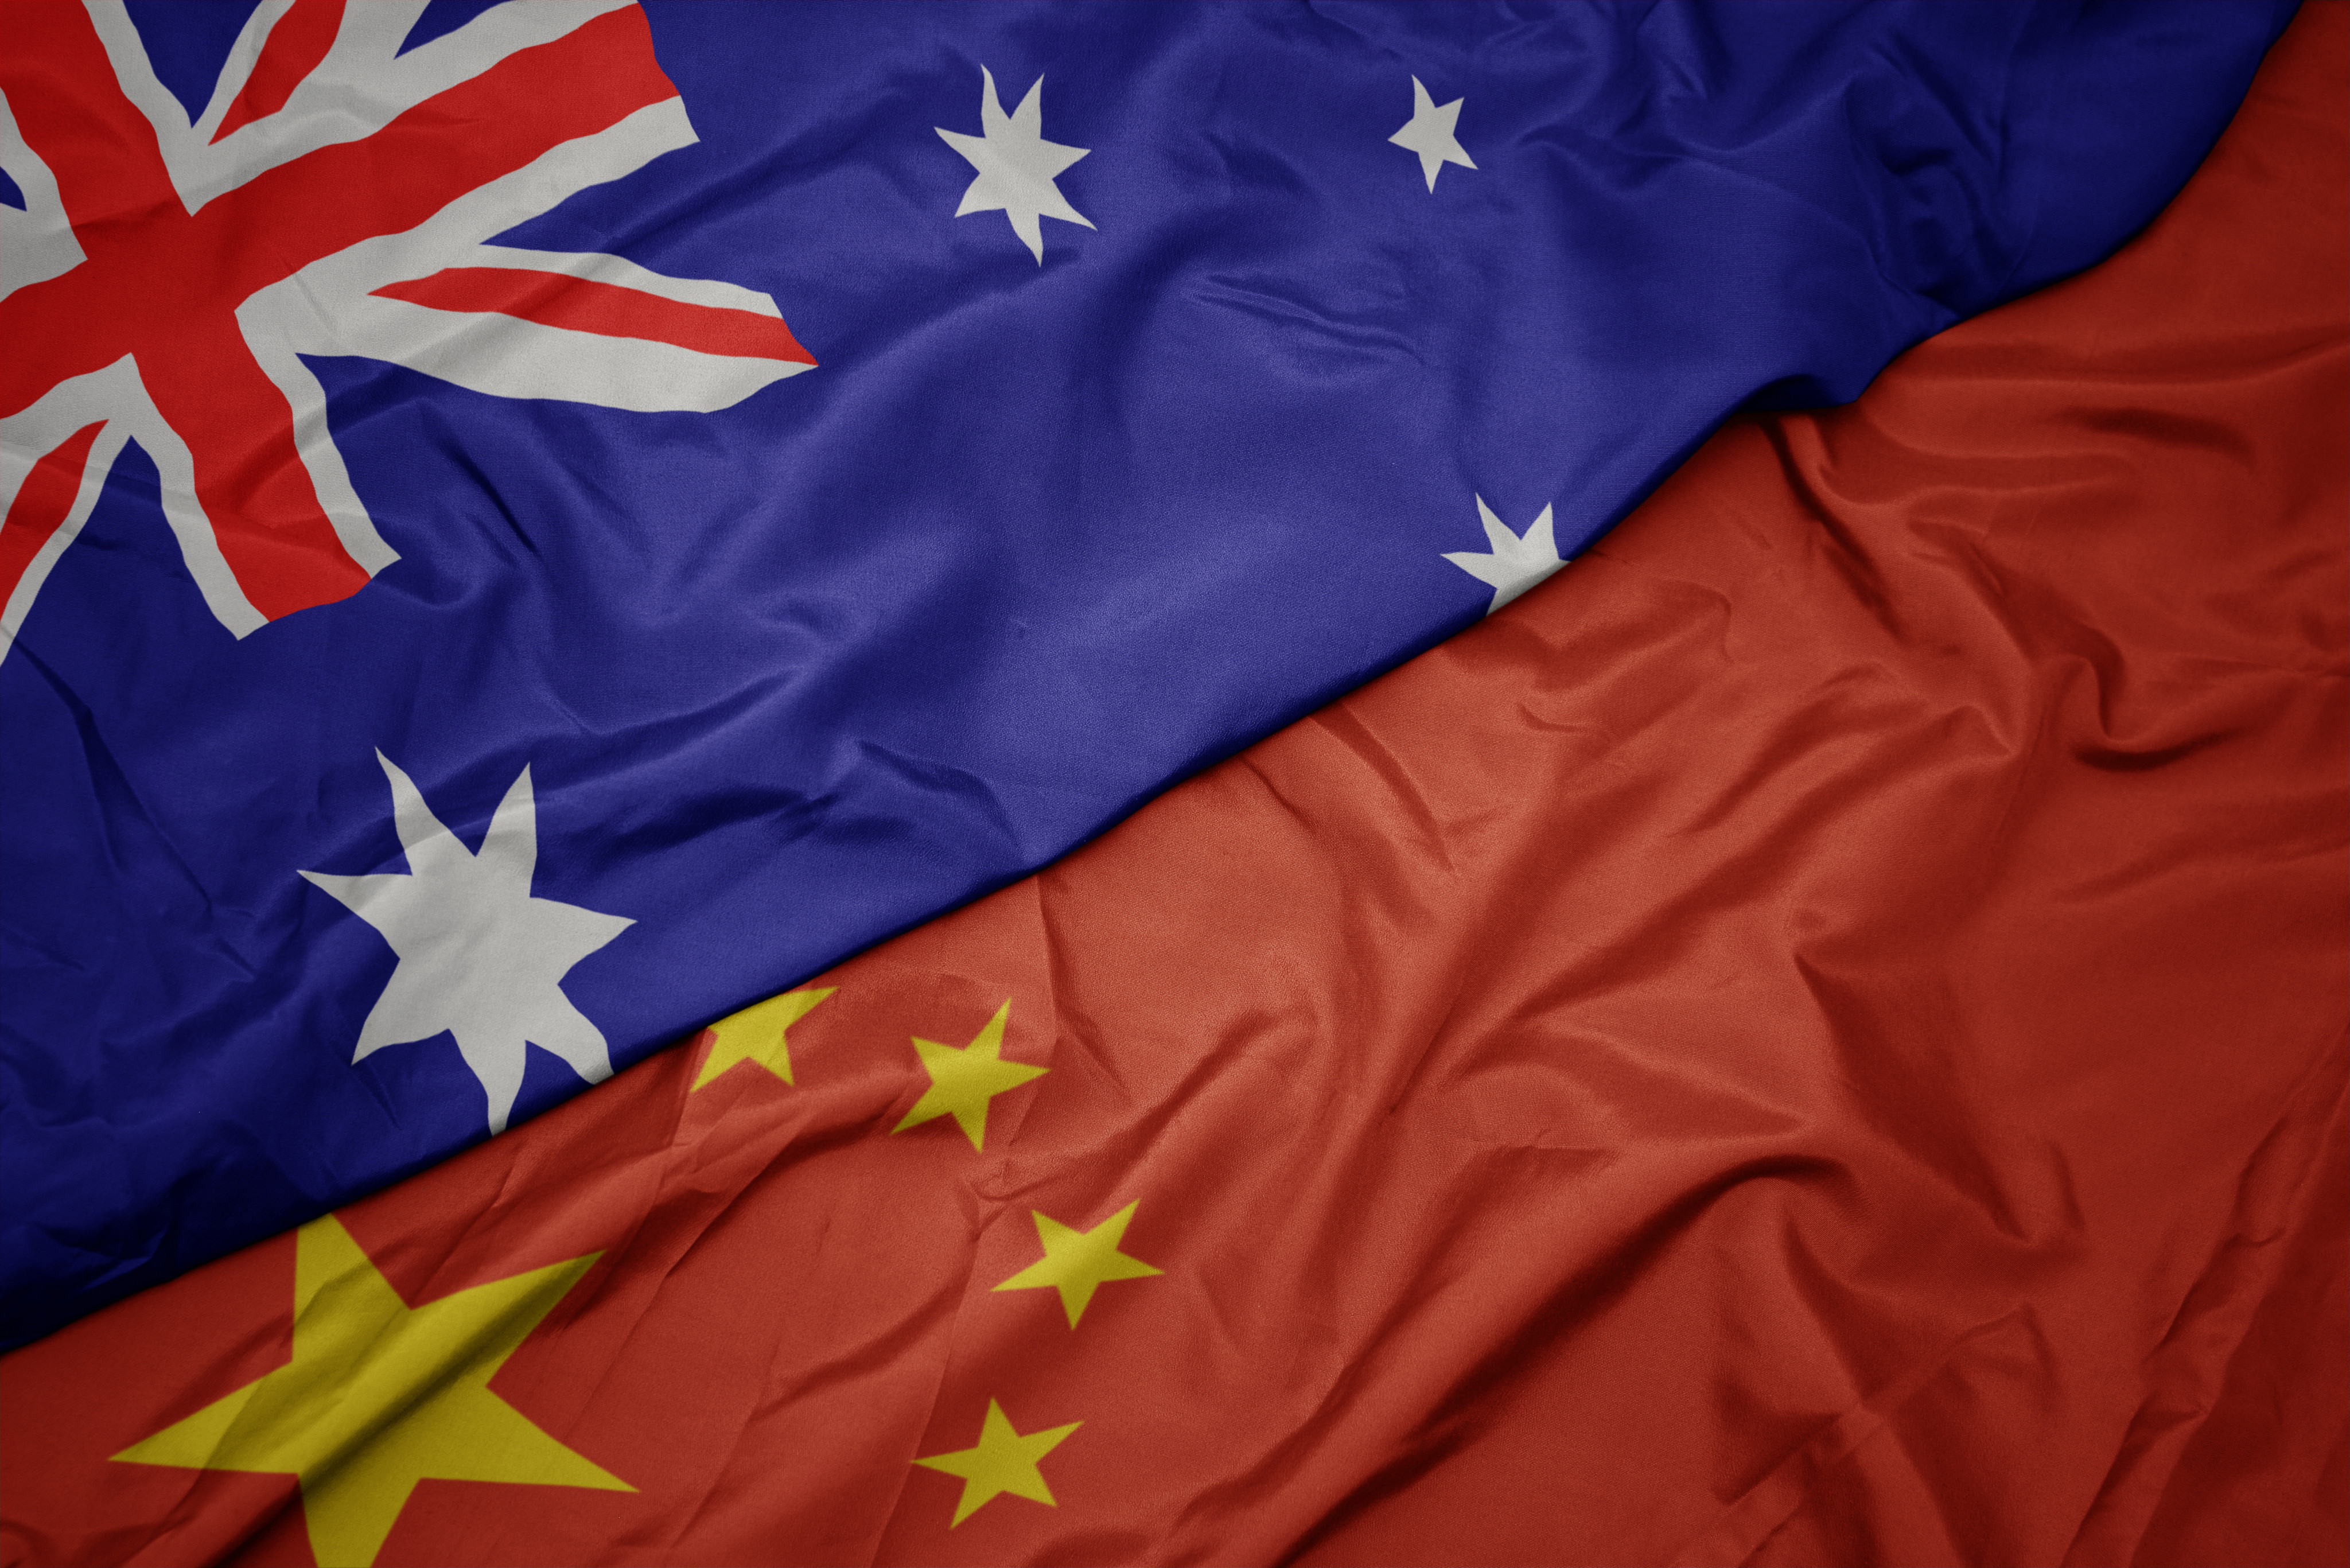 Defence officials from Australia and China met this month for talks for the first time since 2019. Photo: Shutterstock